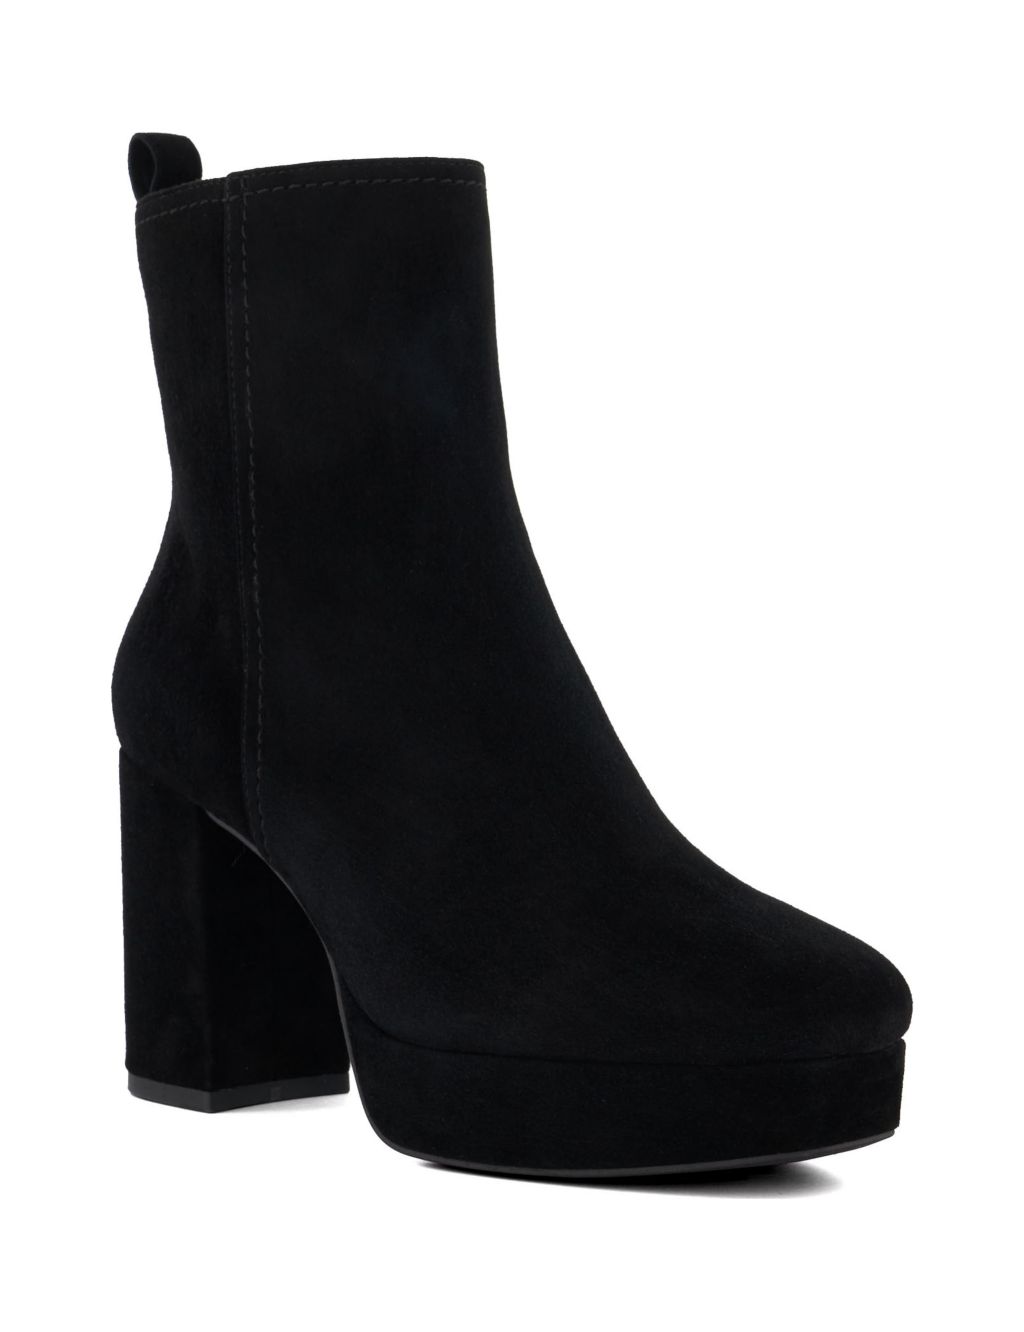 Suede Chunky Platform Ankle Boots | Dune London | M&S